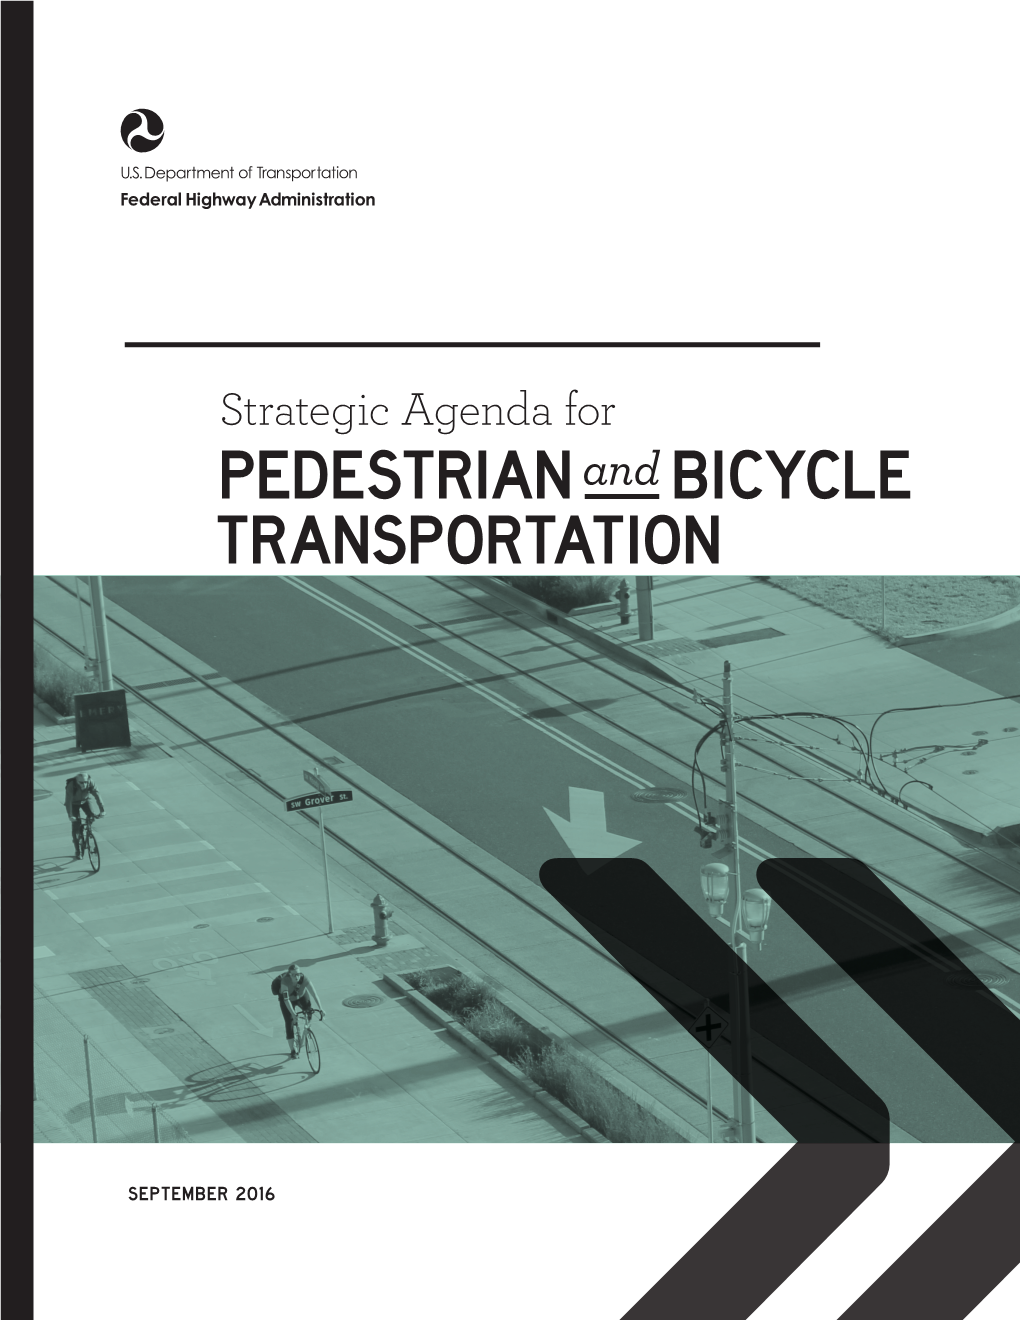 Strategic Agenda for Pedestrian and Bicycle Transportation 2016